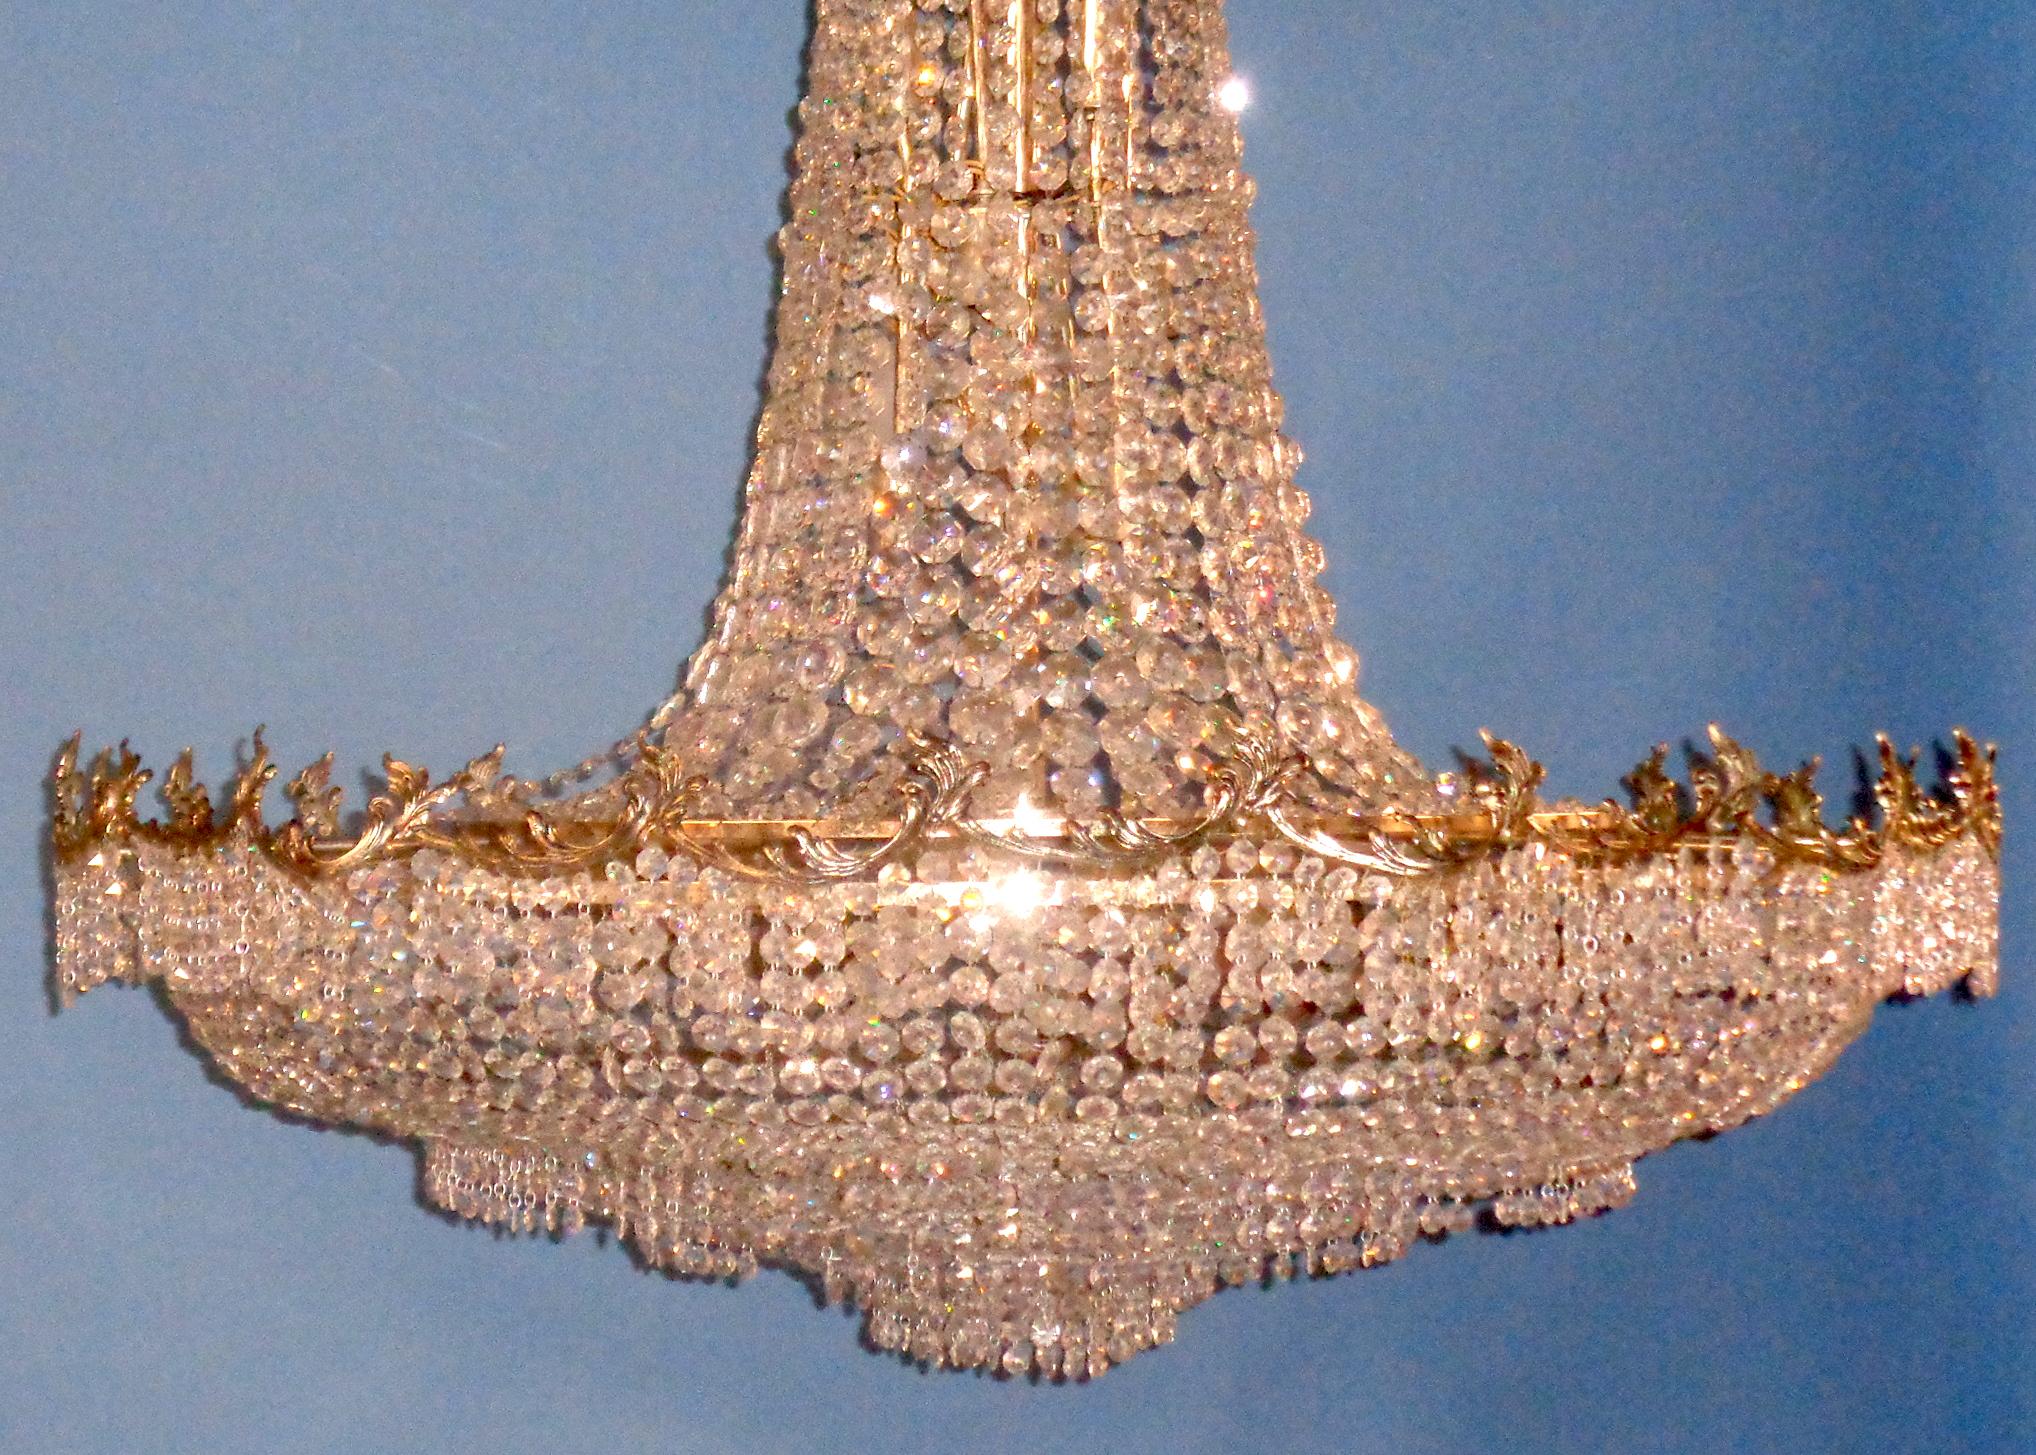 Silver plated Palladian chandelier adorned with swagger multifaceted crystals. It was custom made for Perino’s, known as the premier restaurant for famous celebrities. This chandelier hung in their private dining room. There are twenty three tiered